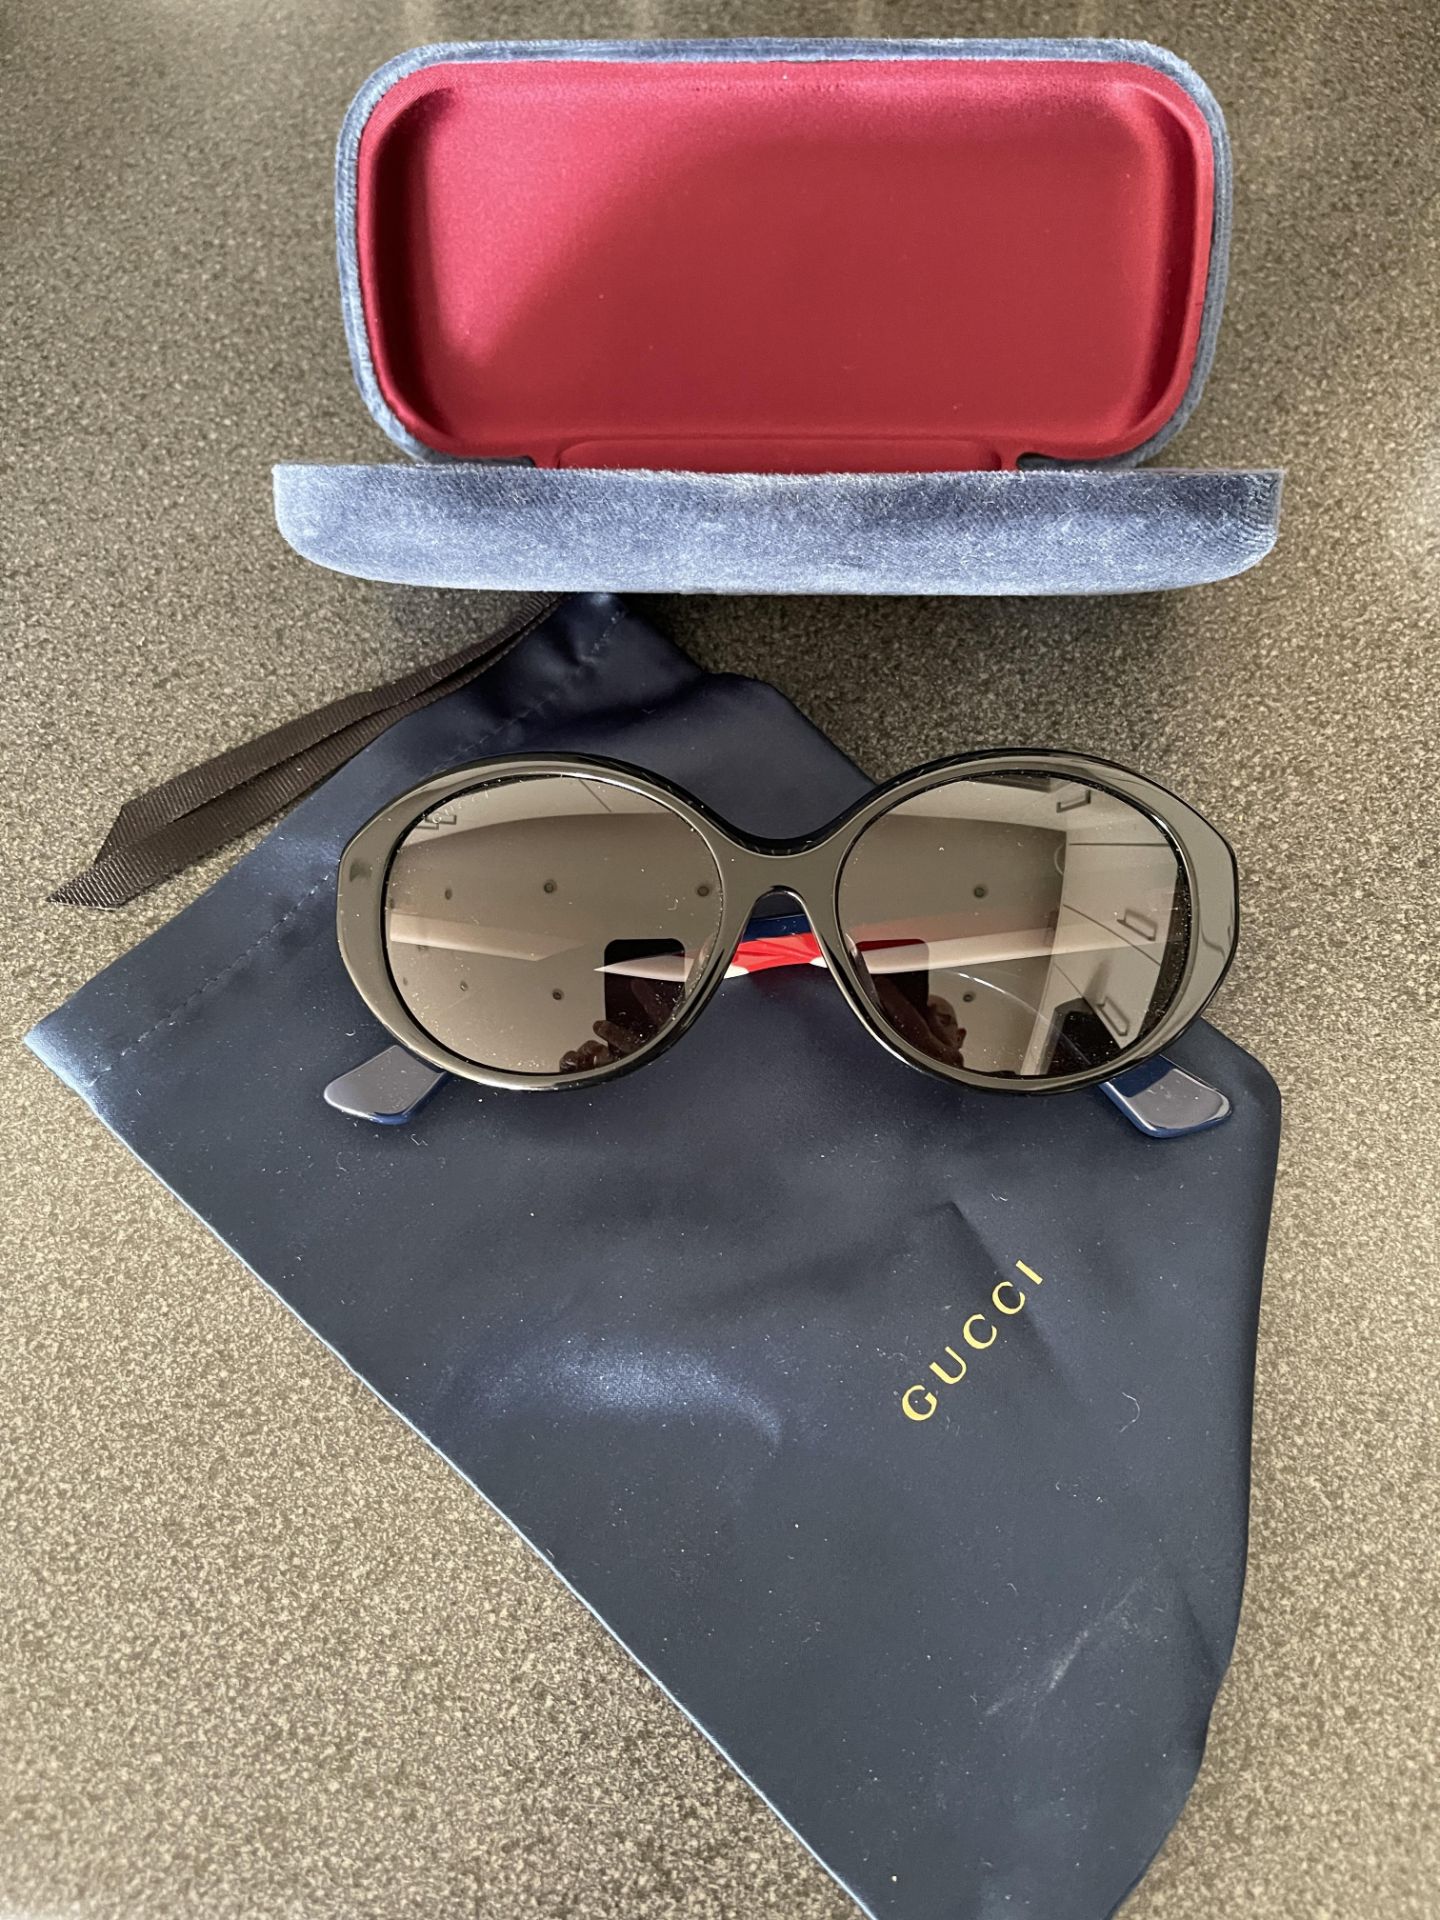 Gucci ladies sunglasses demon from a private jet charter. with case and cloth - Image 9 of 9